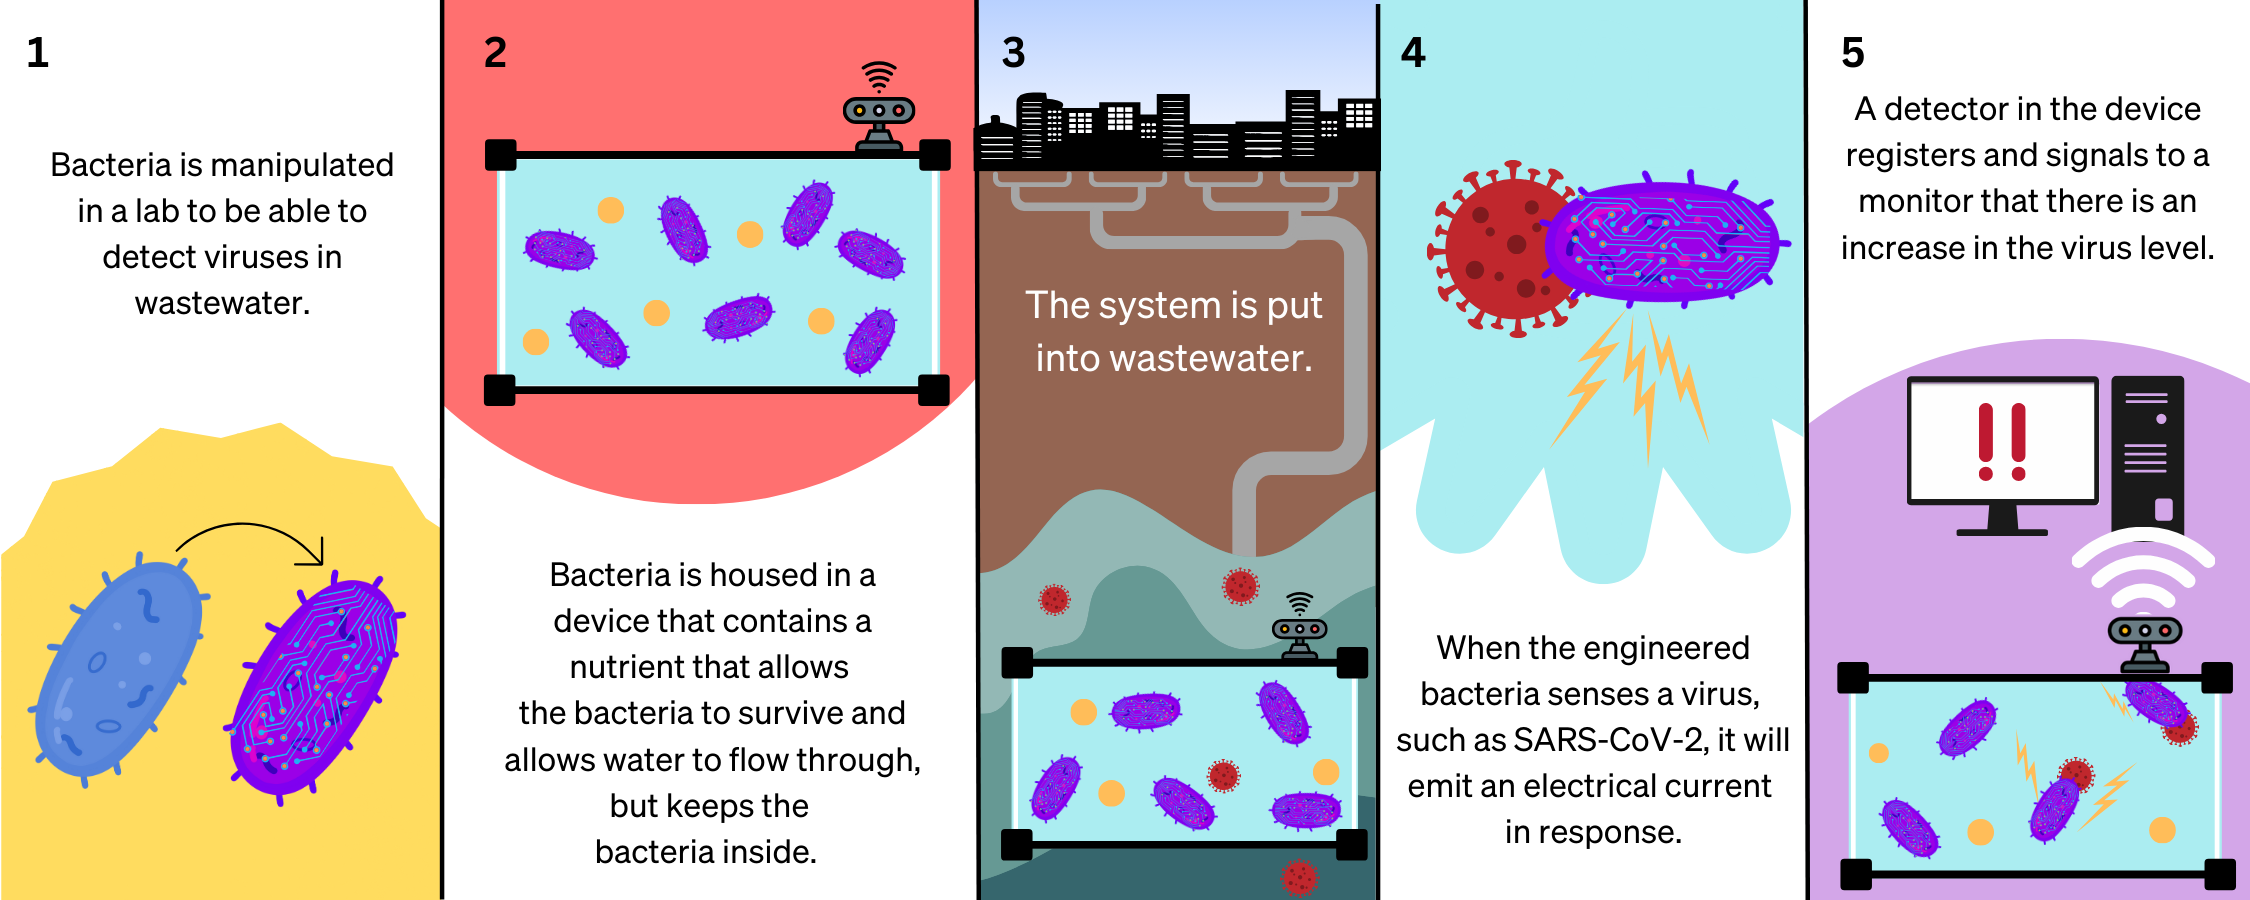 Bacteria Wastewater